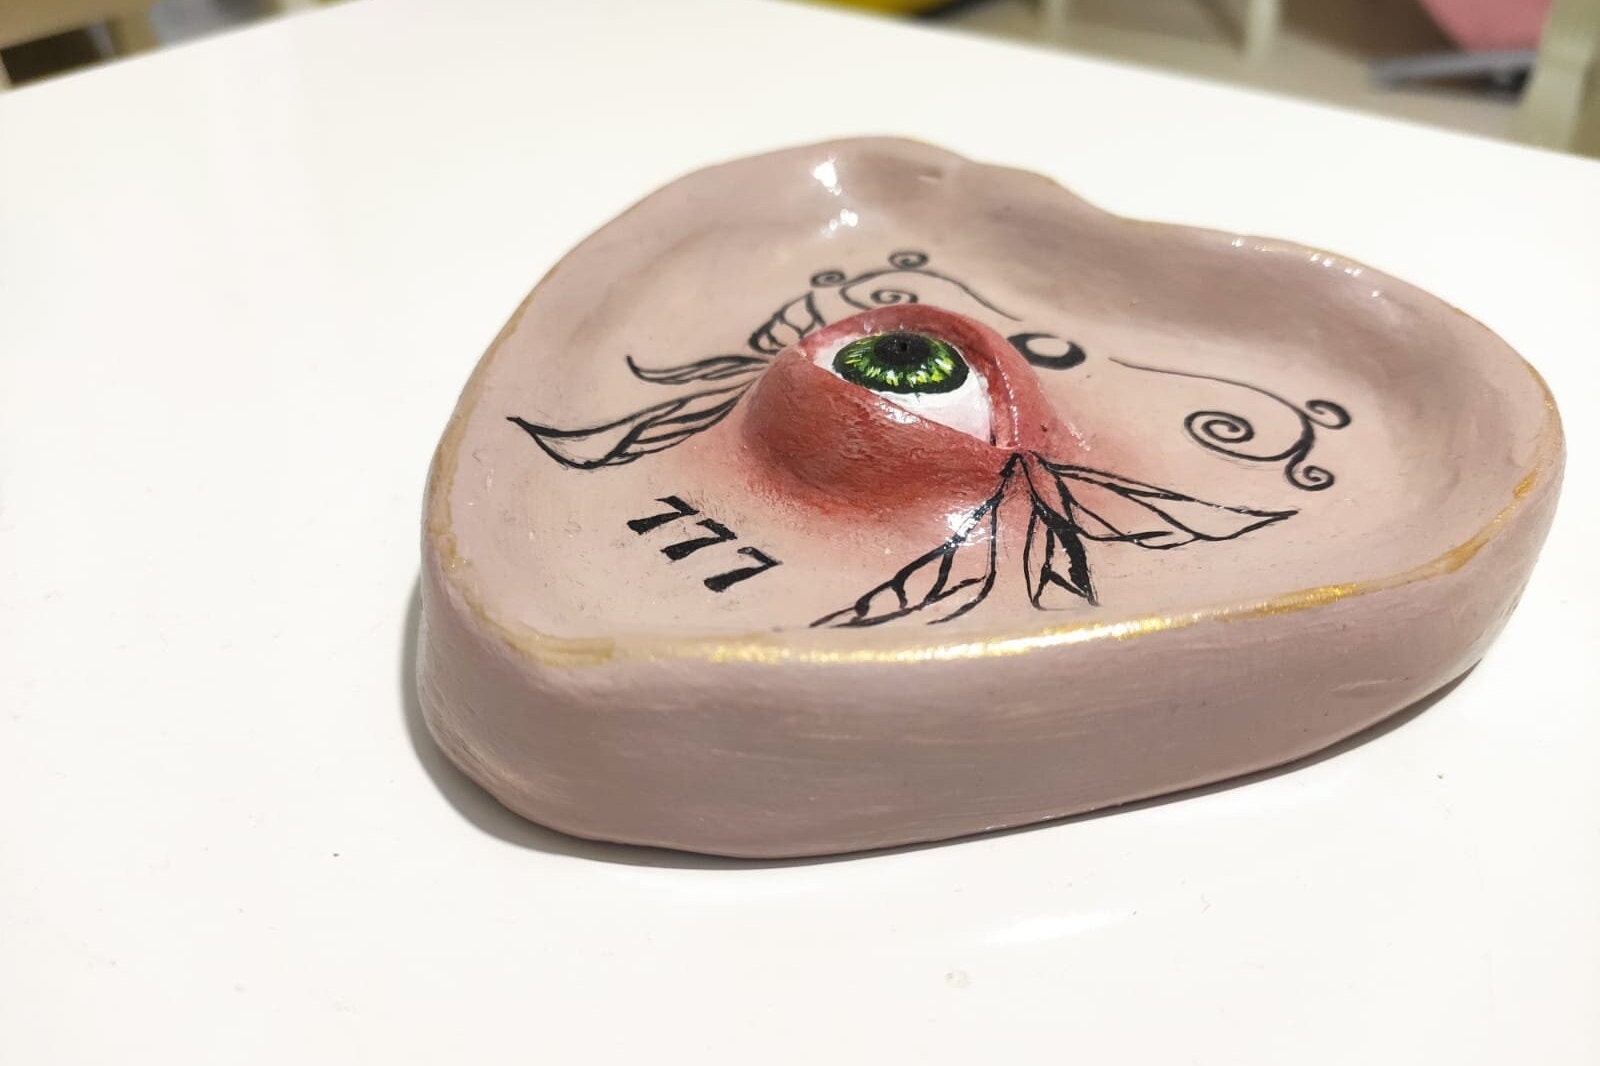 Butterfly Eye Luck Handmade Clay Ashtray Incense Holder Incense